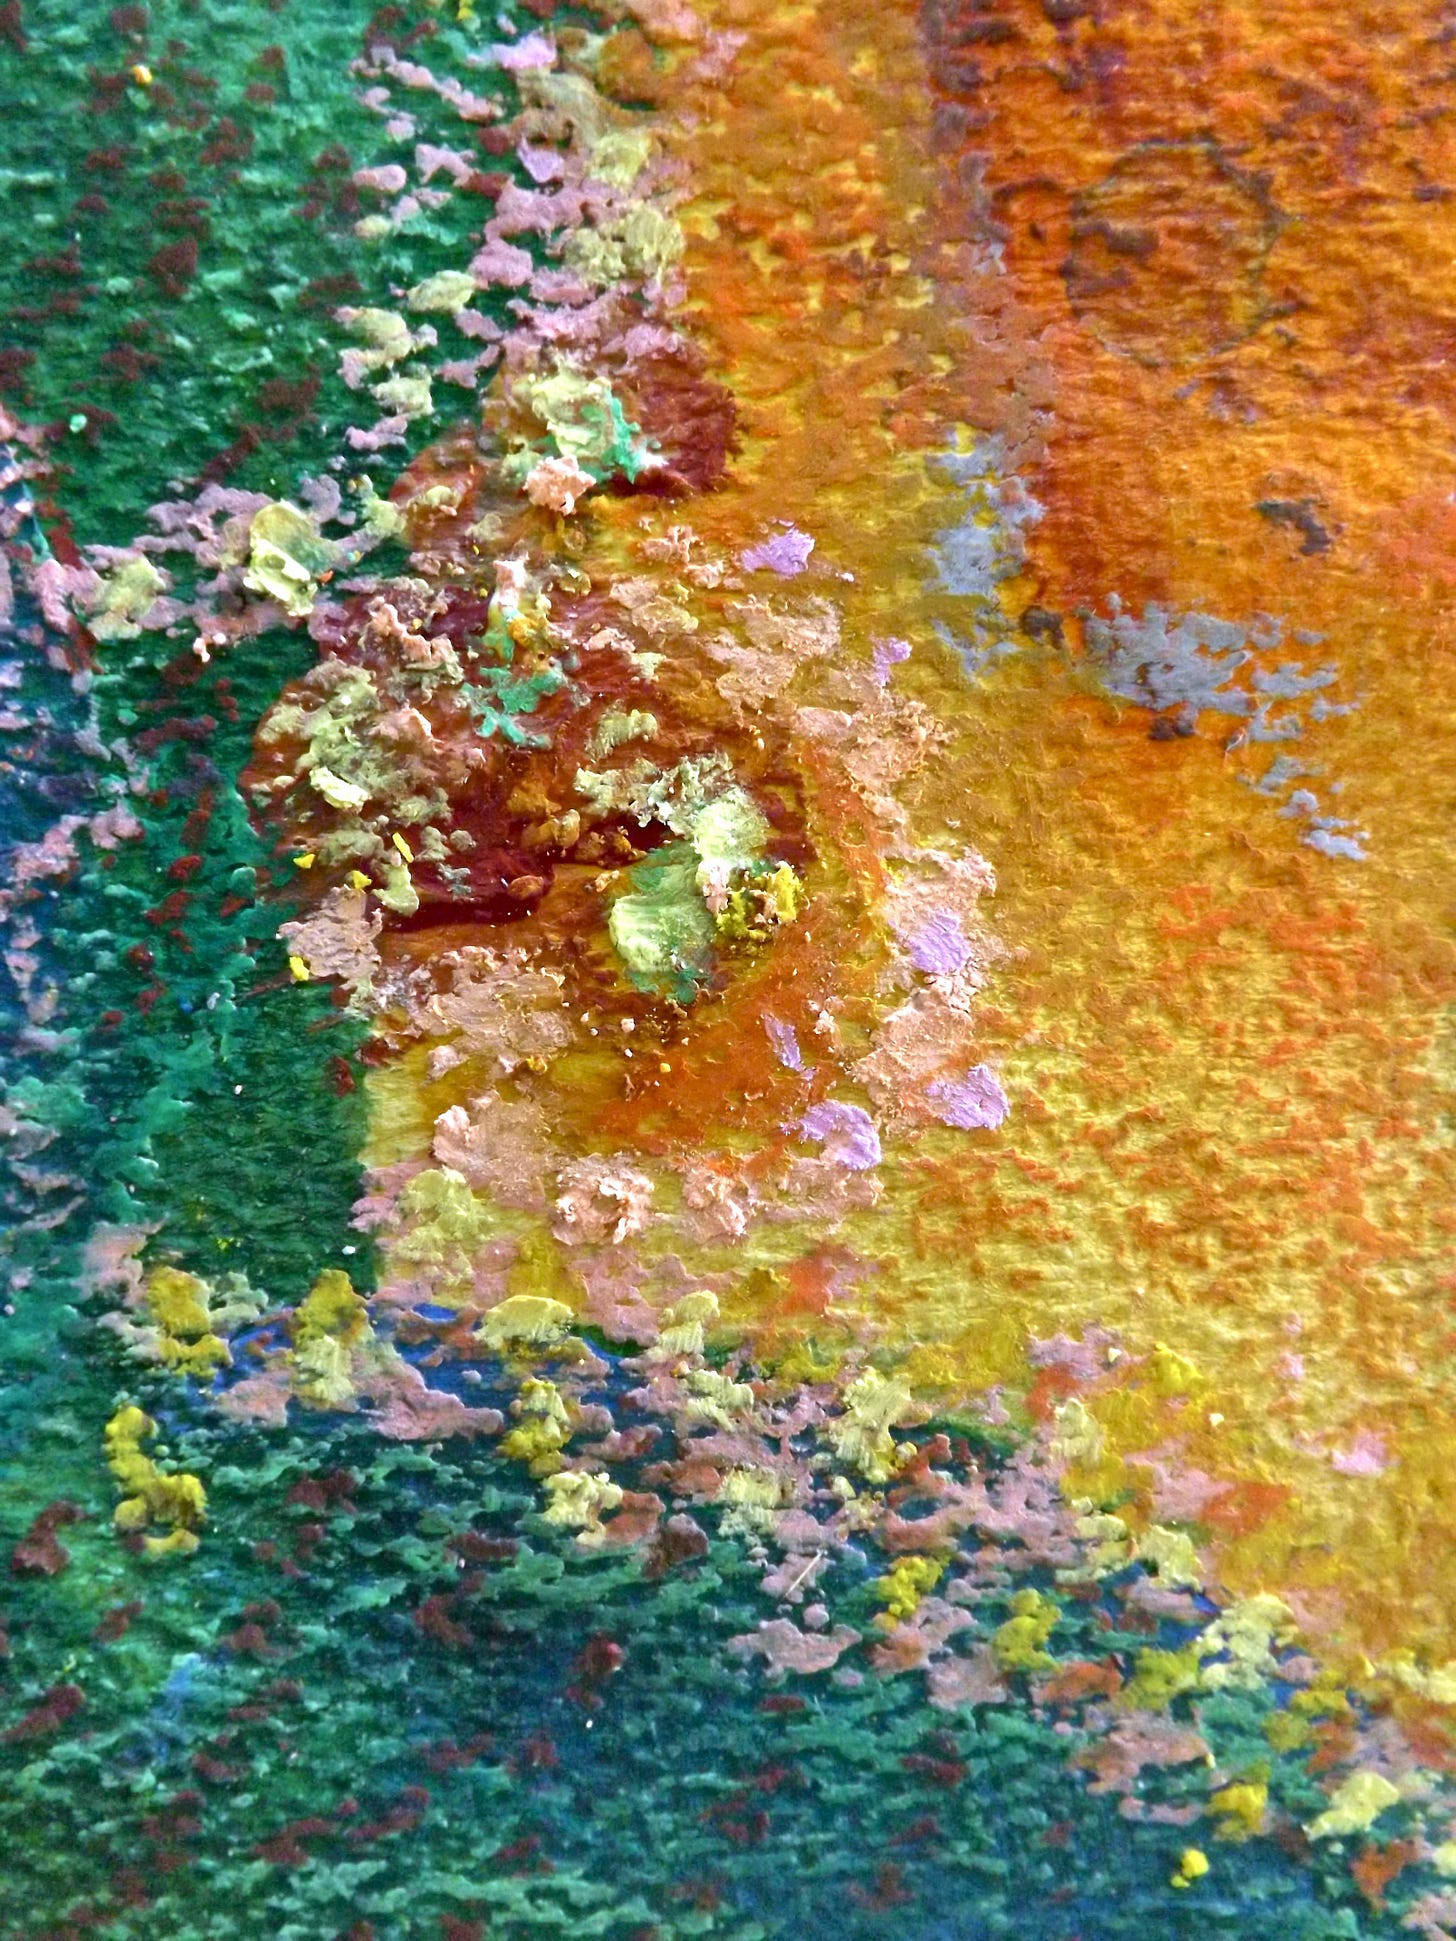 Photo of a detail from a mixed media painting by Sherry Killam Arts suggesting a flower-strewn golden beach by a green lagoon.